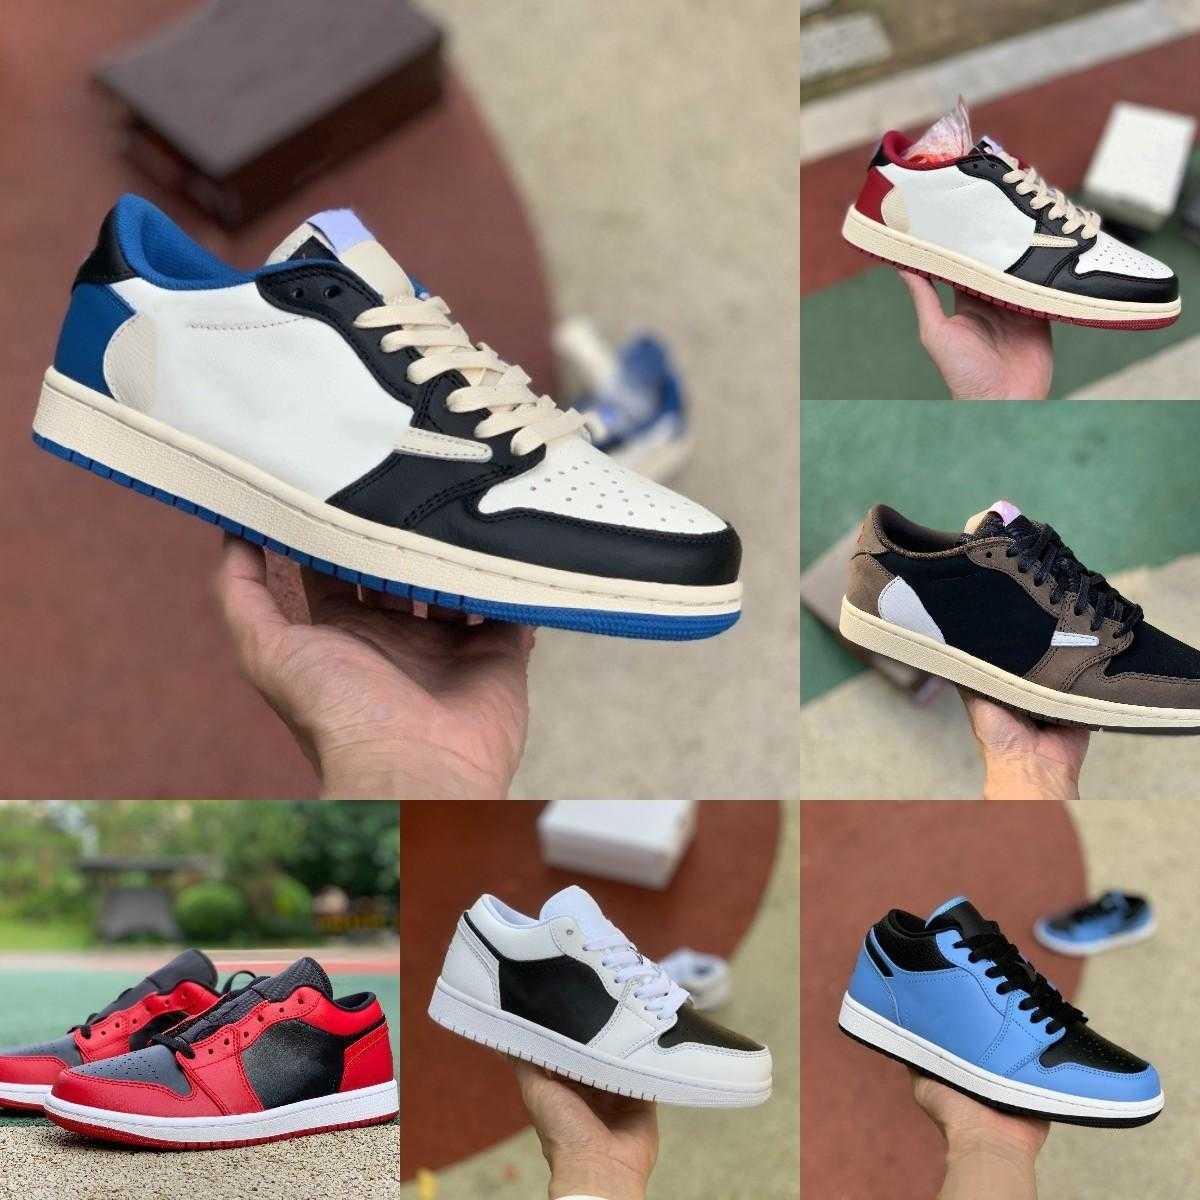 

2022 Jumpman X 1 1S Low Basketball Shoes Sandals Starfish White Brown Gold Banned UNC Court Purple Gold Black Toe Panda Noble Red Wolf Grey Designer Sports Sneakers, Please contact us